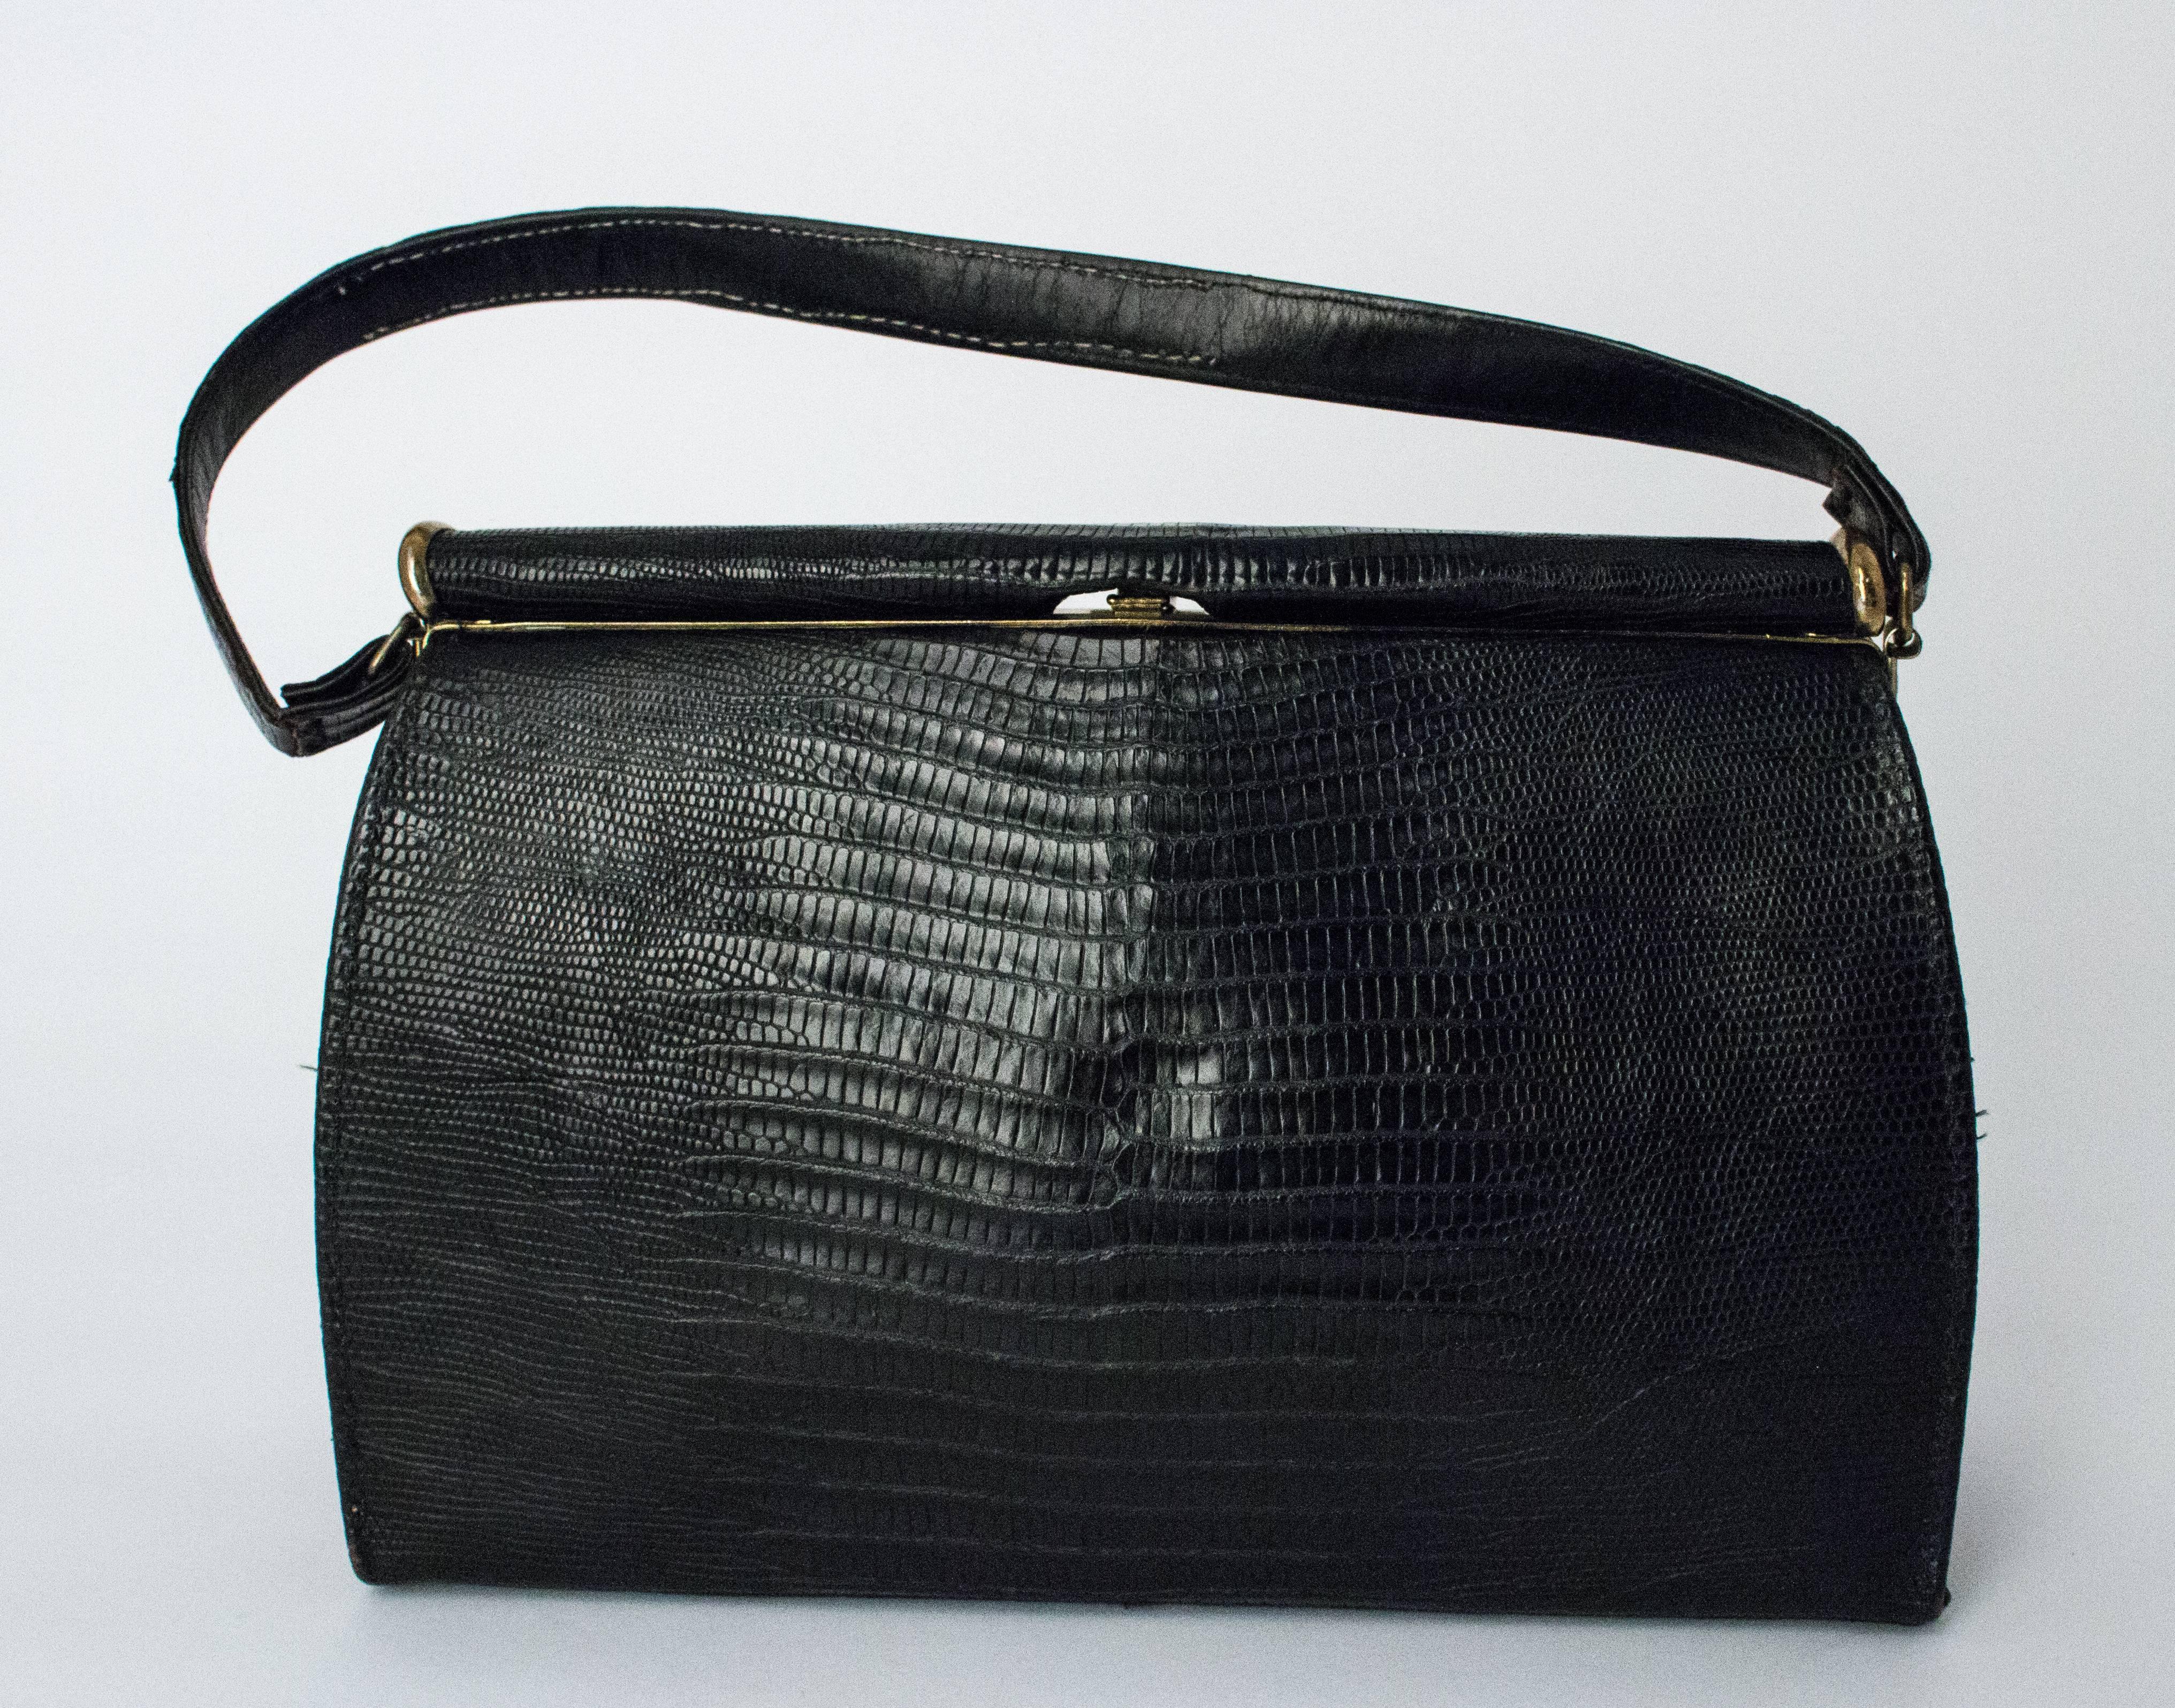 50s Black Lizard Handbag. Leather interior, one side pocket, lizard covered outside hardware. Comes with original mirror. 